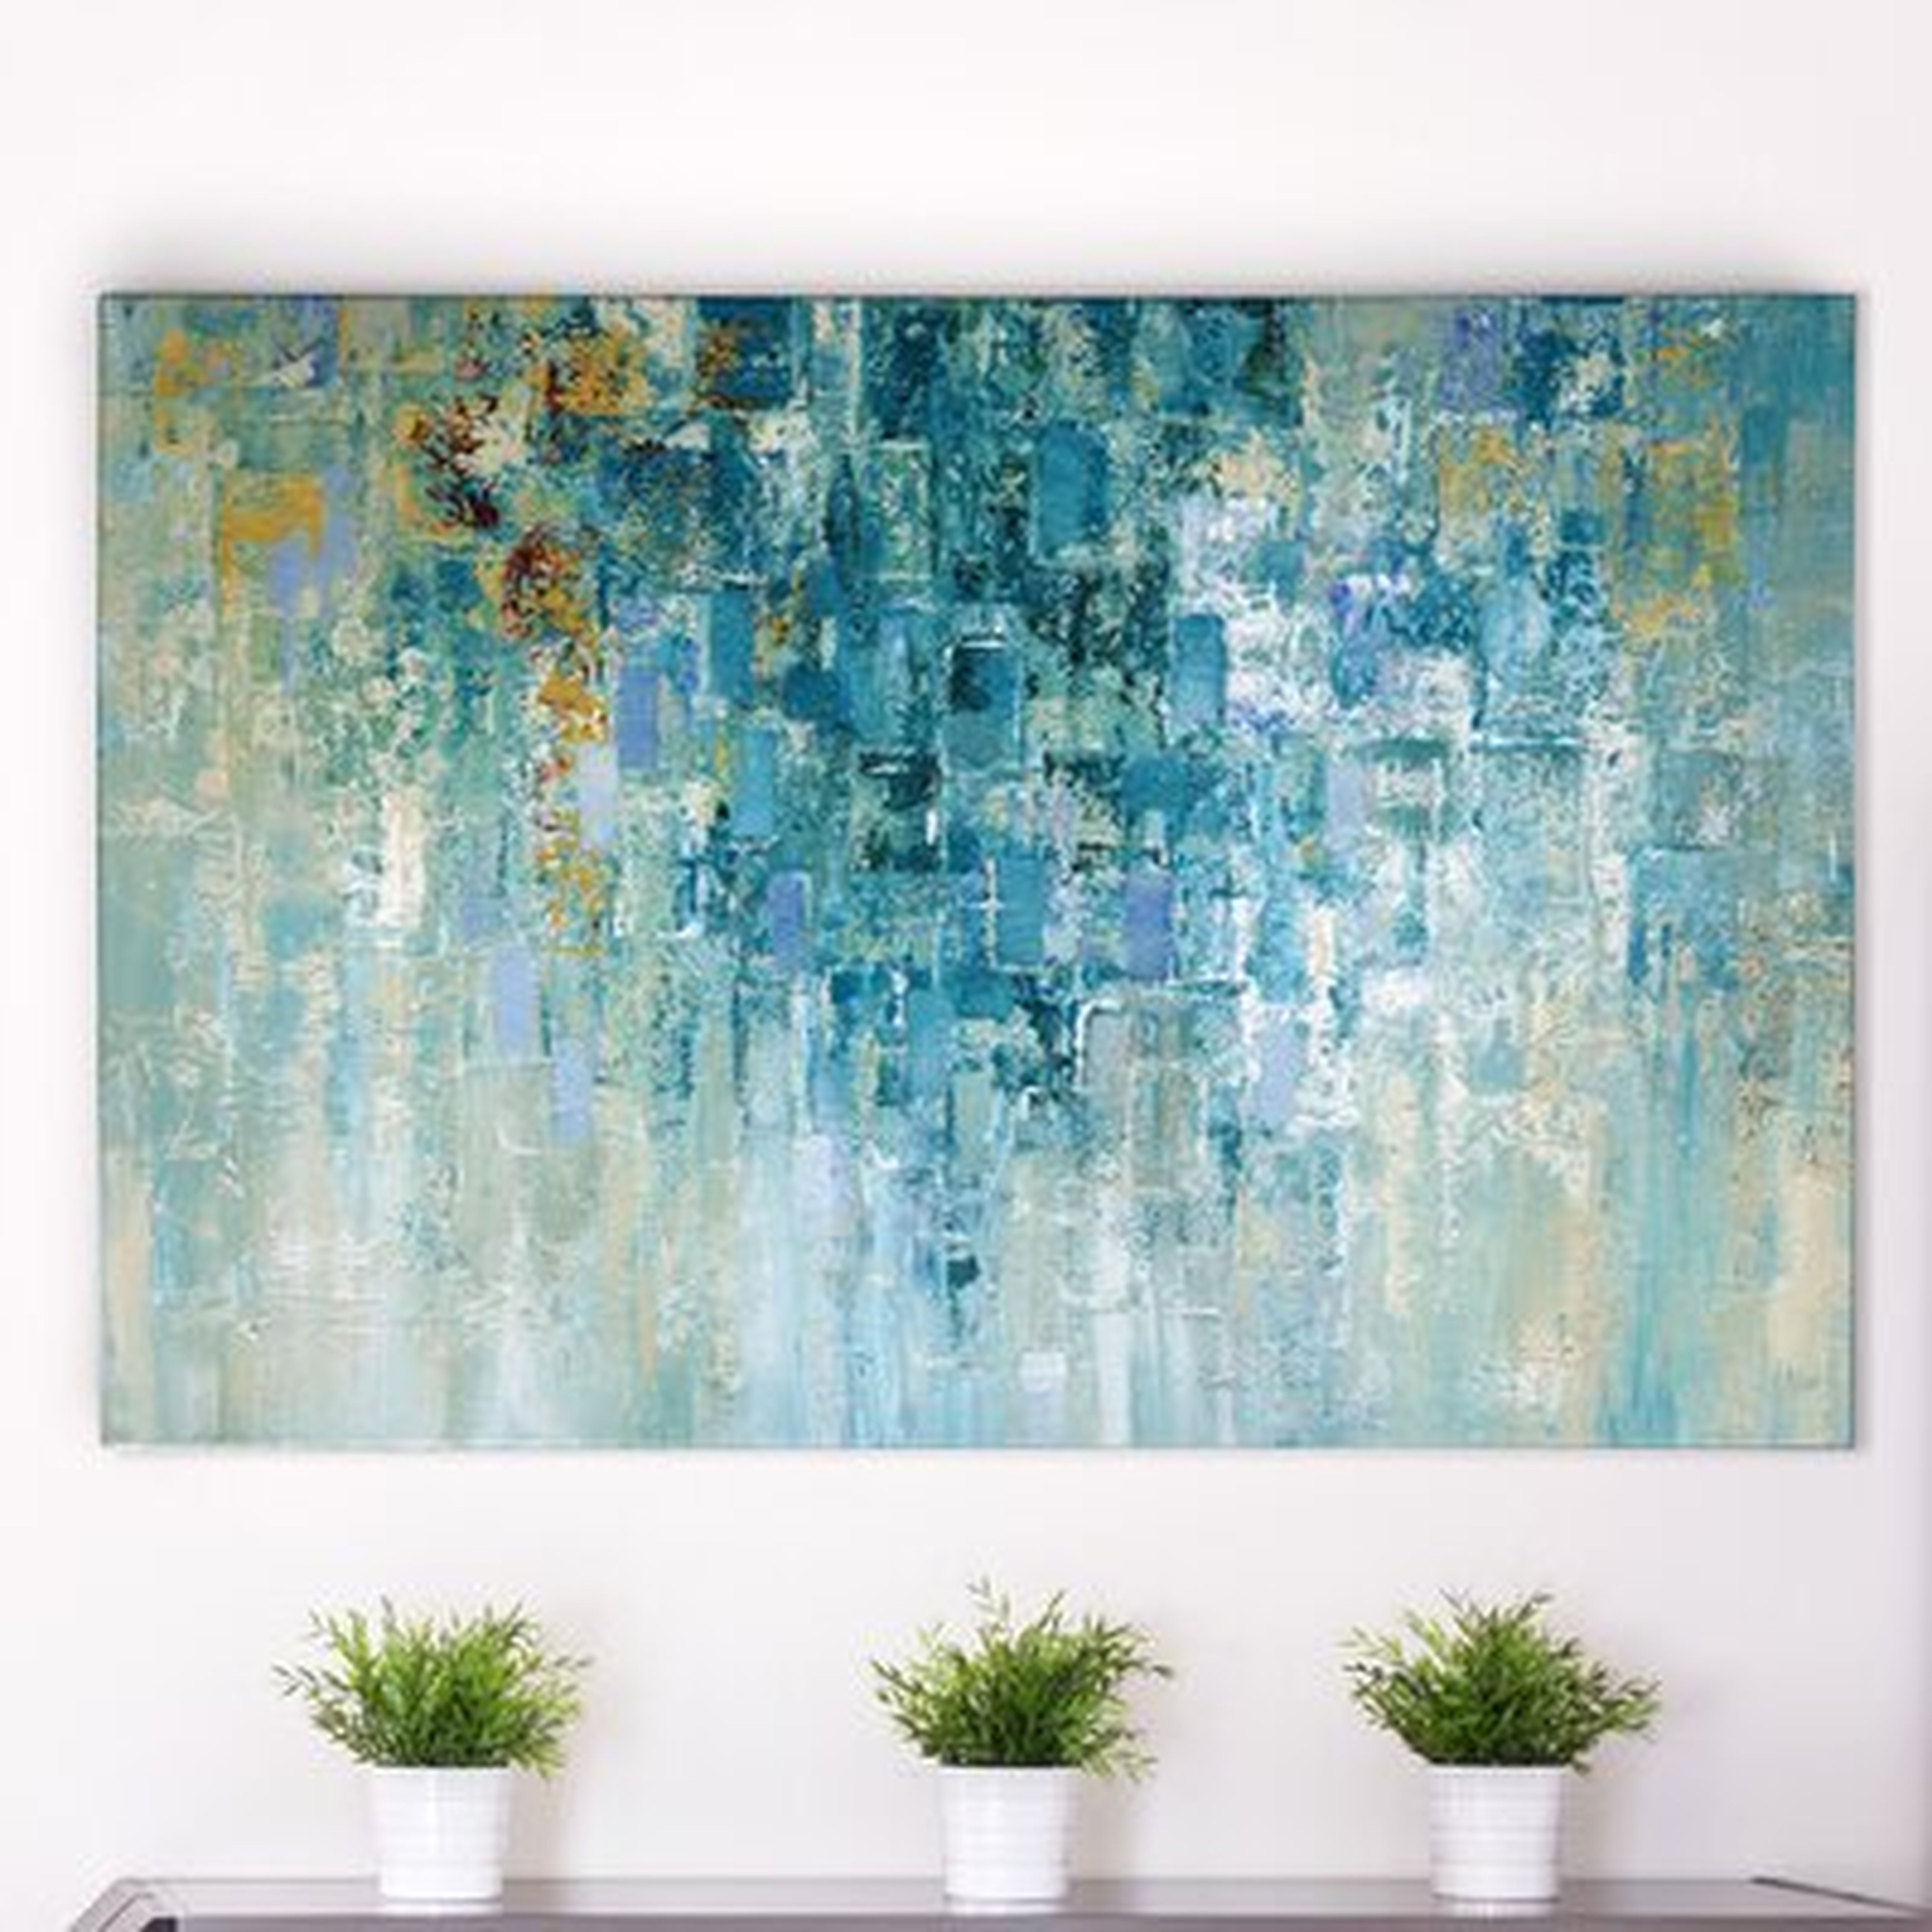 'I Love the Rain' Painting Print on Wrapped Canvas - AllModern